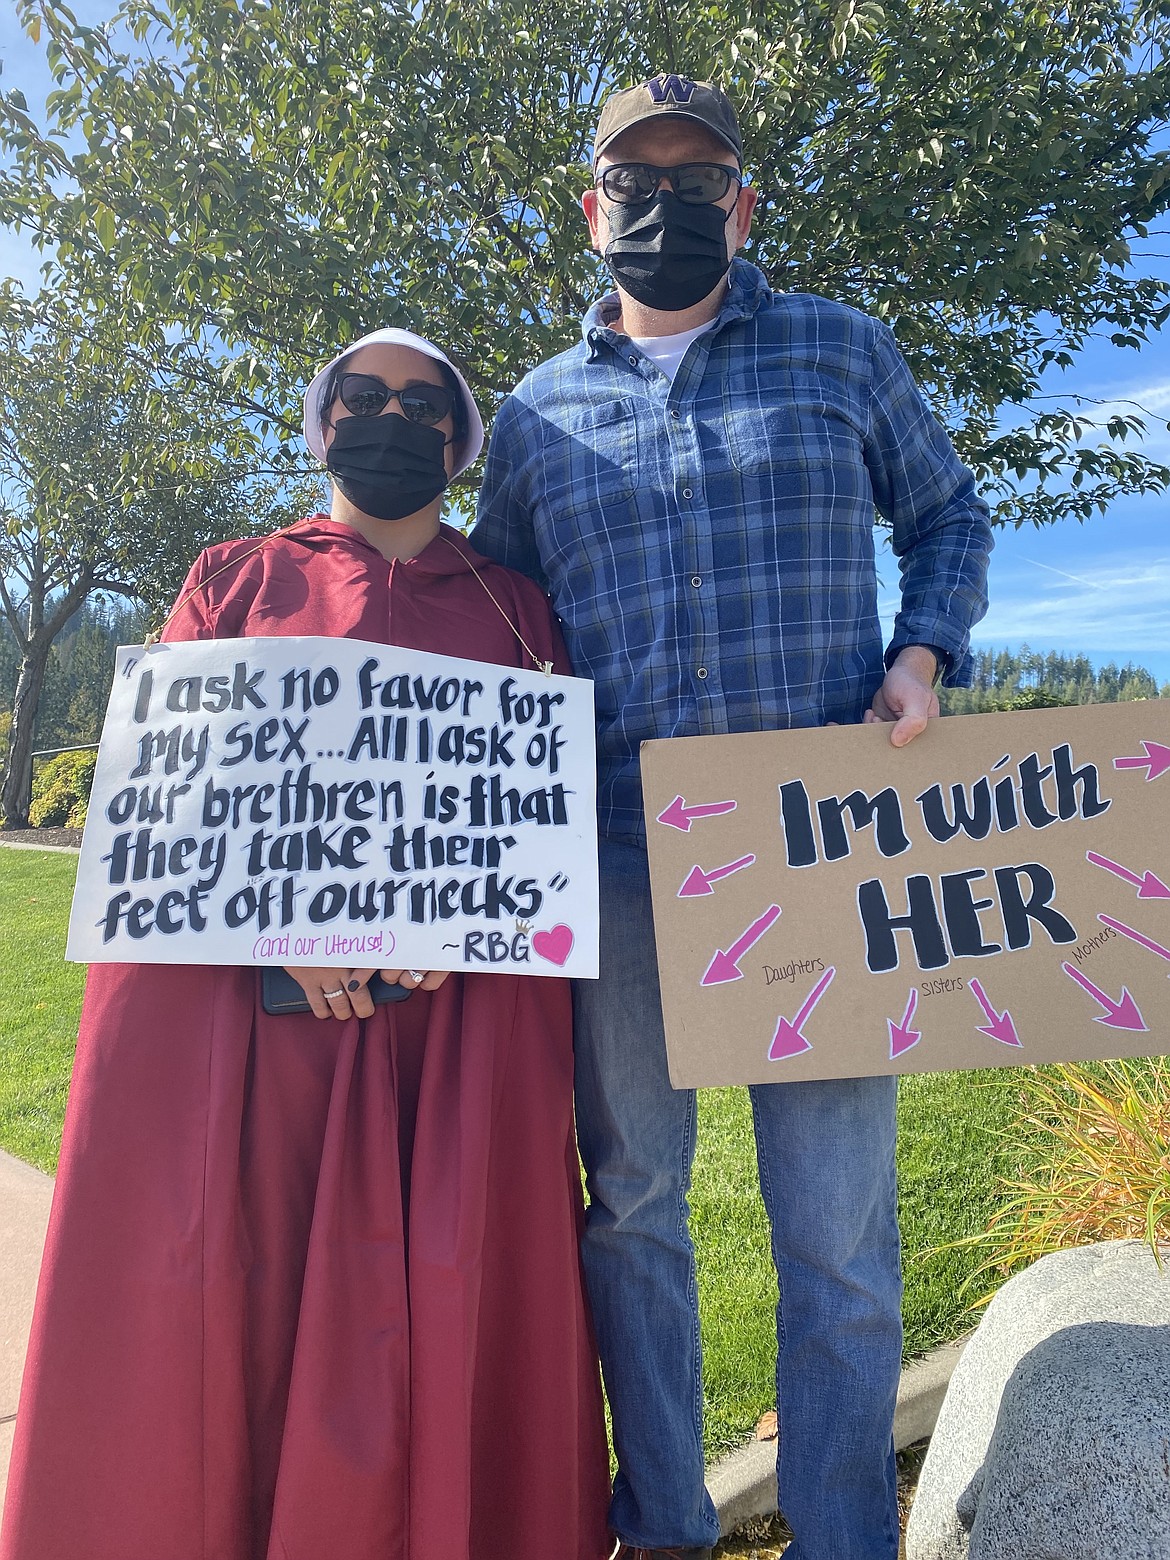 Twenty-year residents Mirna and Scott Pleines participated in the Women's March for the second year in a row. They say they must stand up for women's rights not only for themselves but for their daughters, ages 20 and 25.